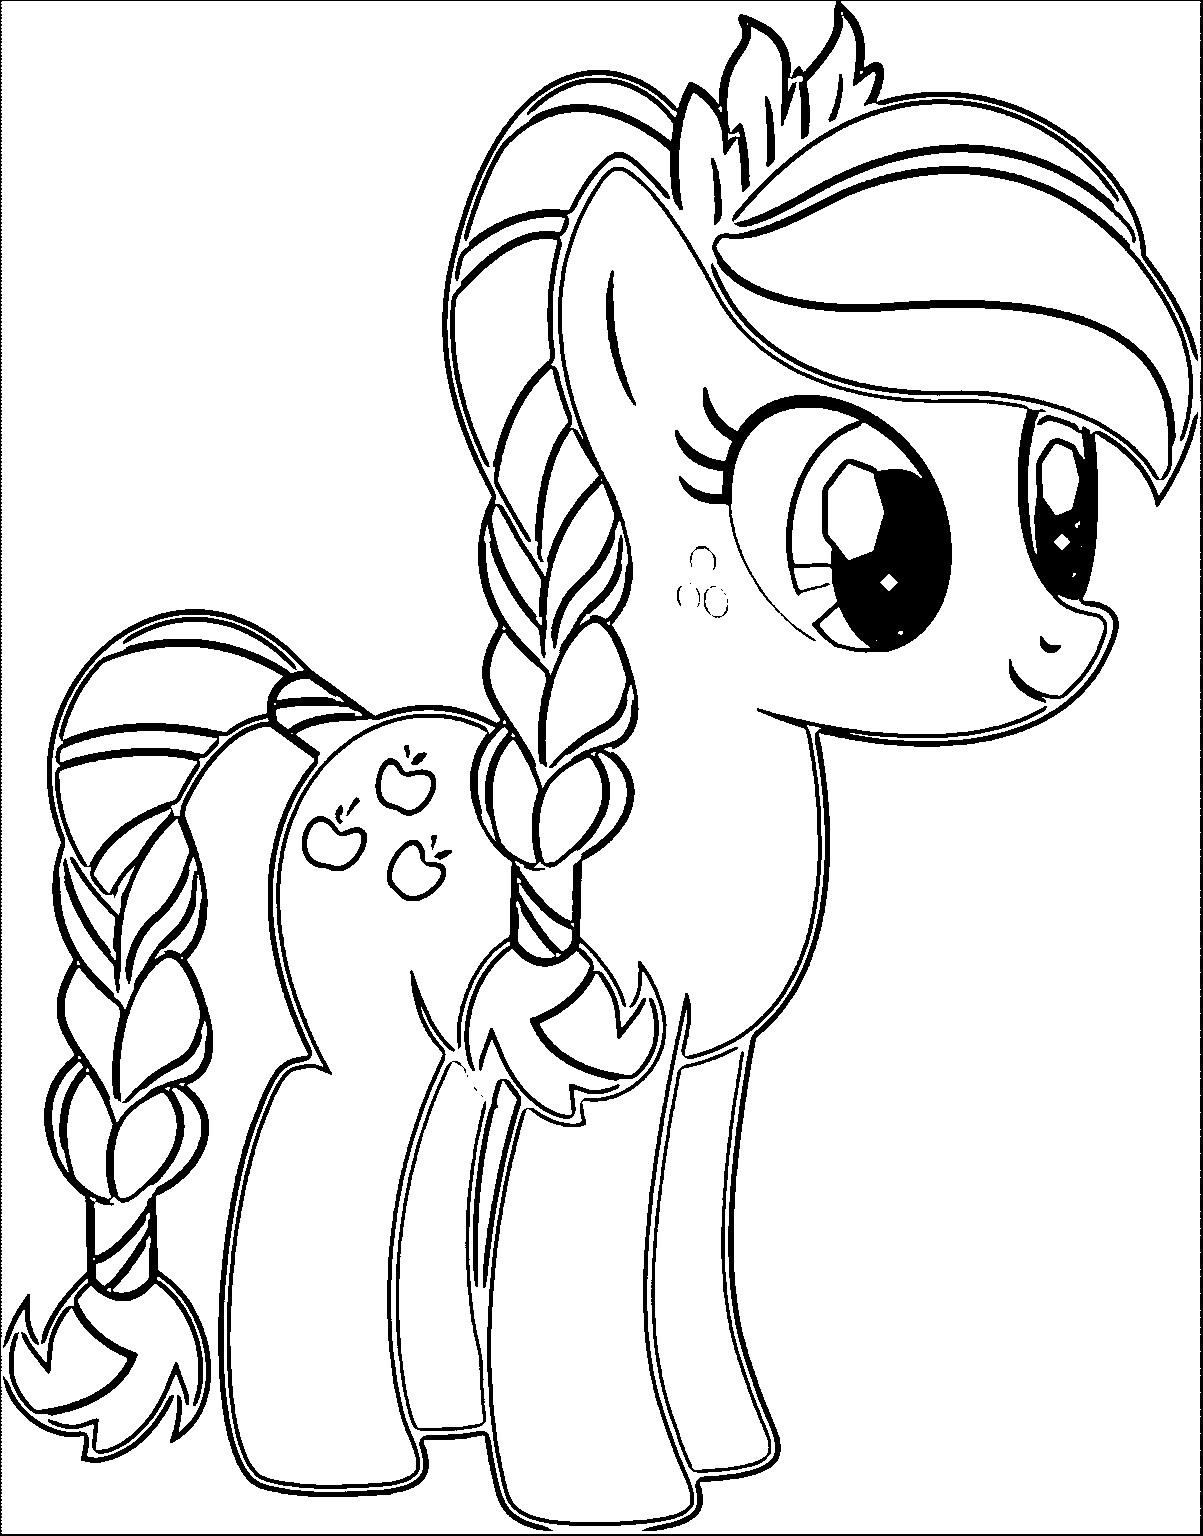 Pony Printable Coloring Pages
 pony cartoon my little pony coloring page 003